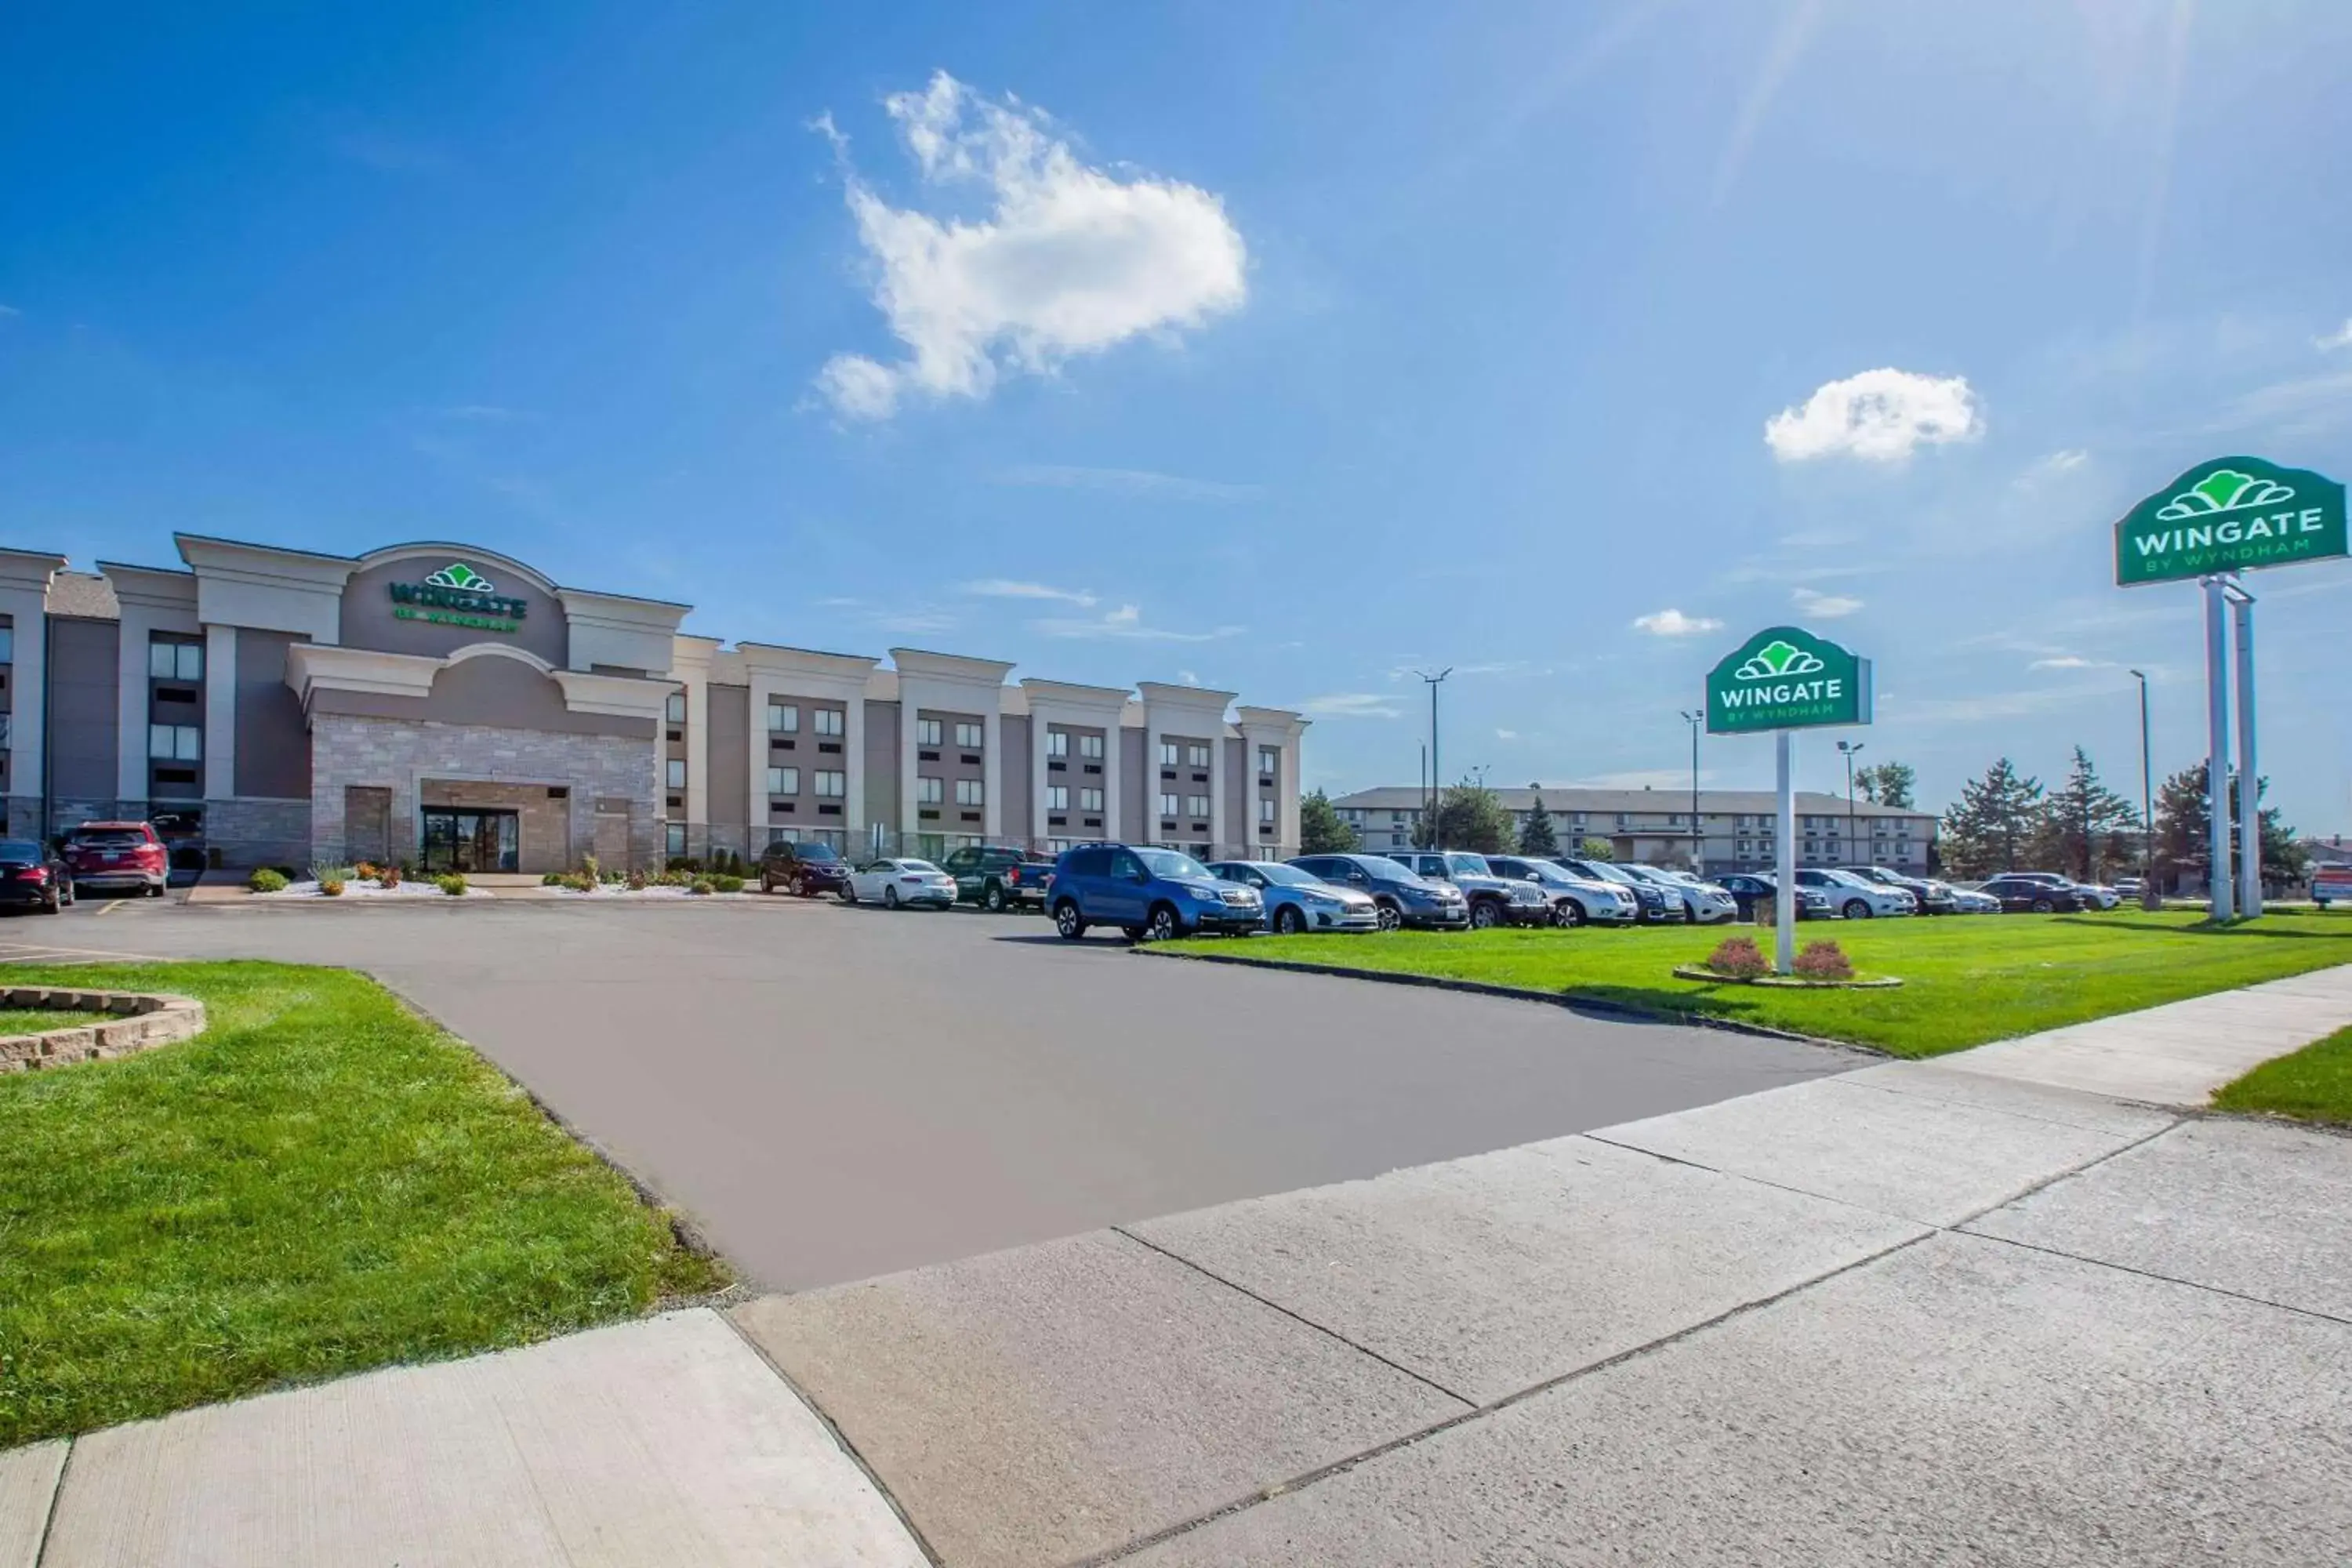 Property building in Wingate by Wyndham Detroit Metro Airport